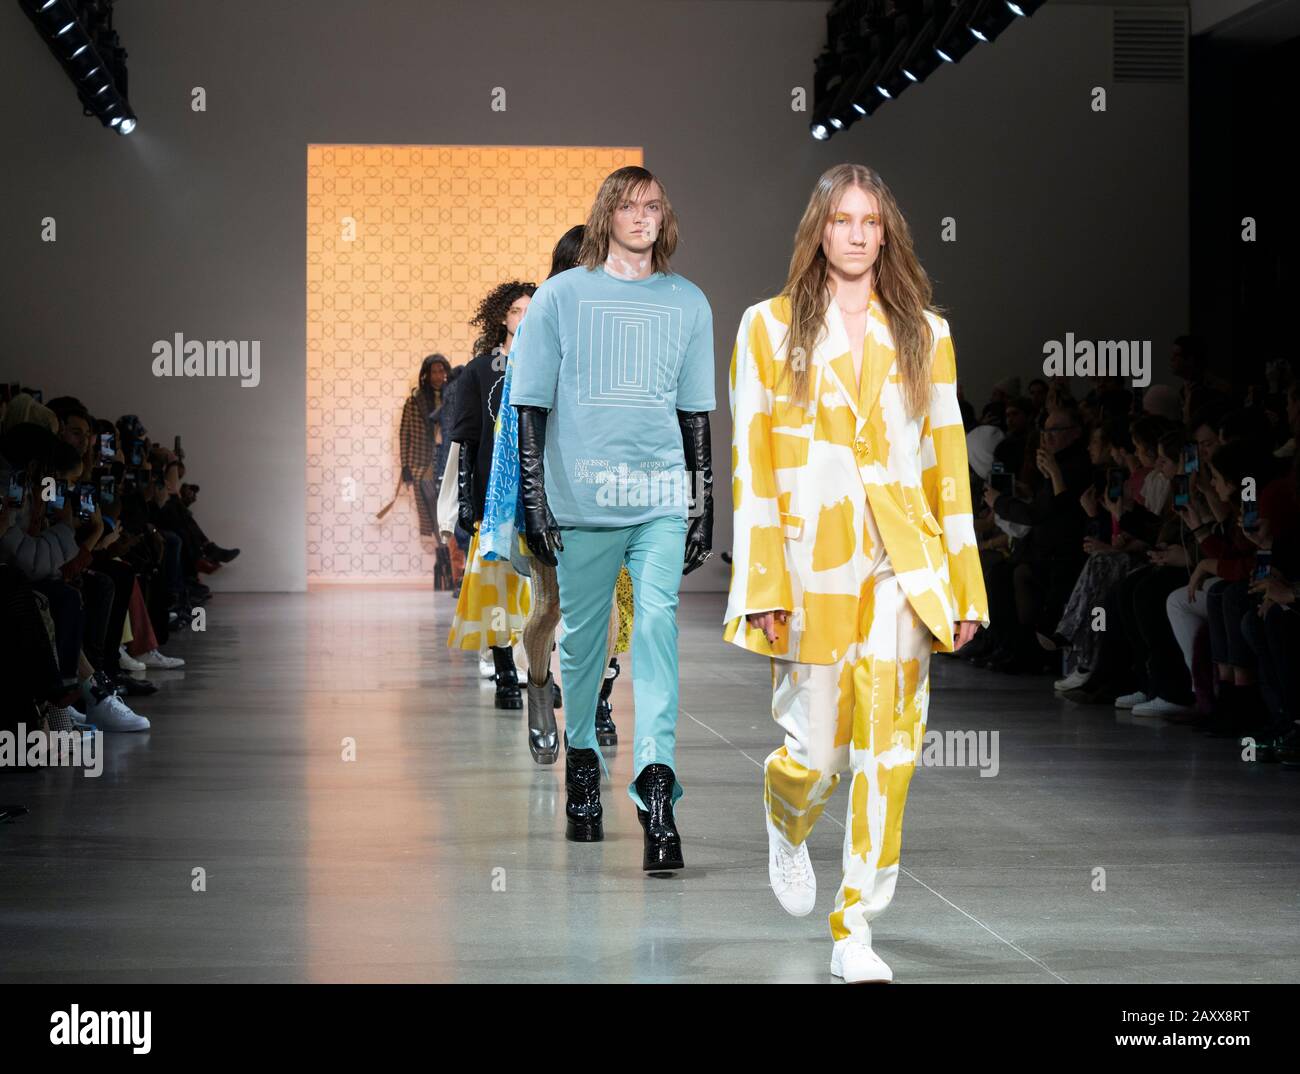 New York, NY - February 12, 2020: Models walk runway for Dirty Pineapple by Elsa Zai and Nellie Wang collection during Fashion Week at Spring Studios Stock Photo